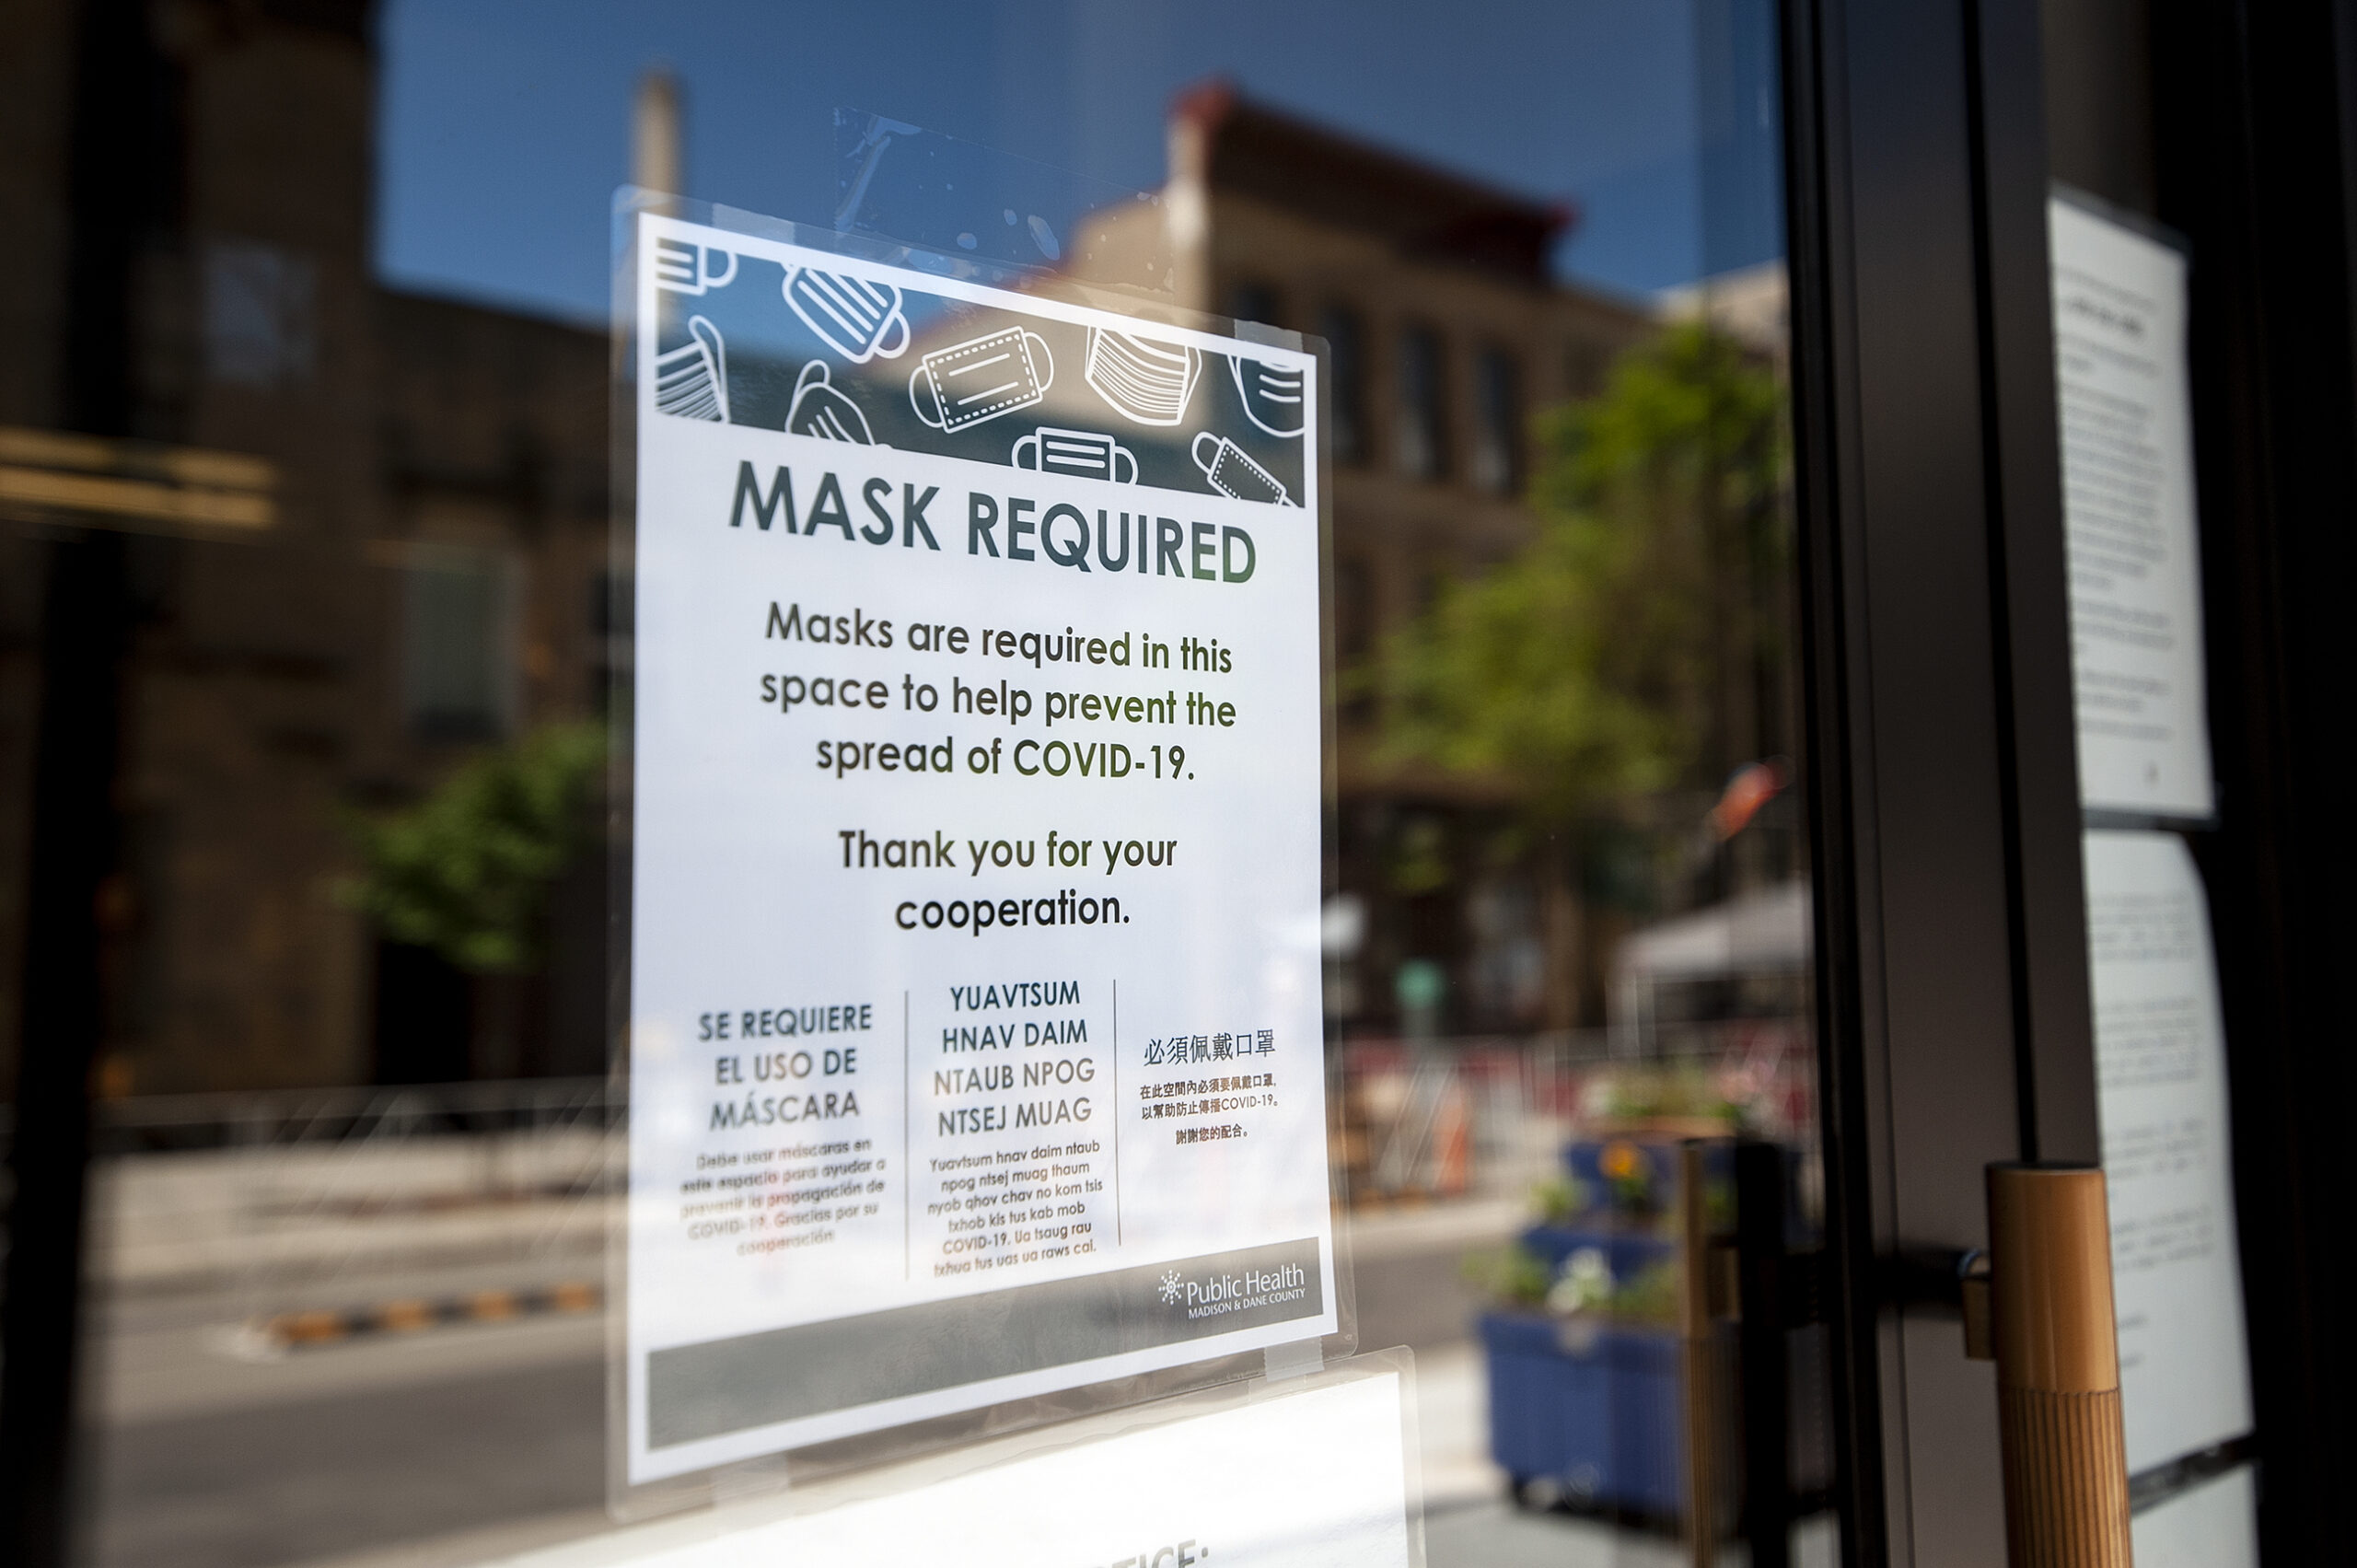 A sign on a glass door says "mask required"